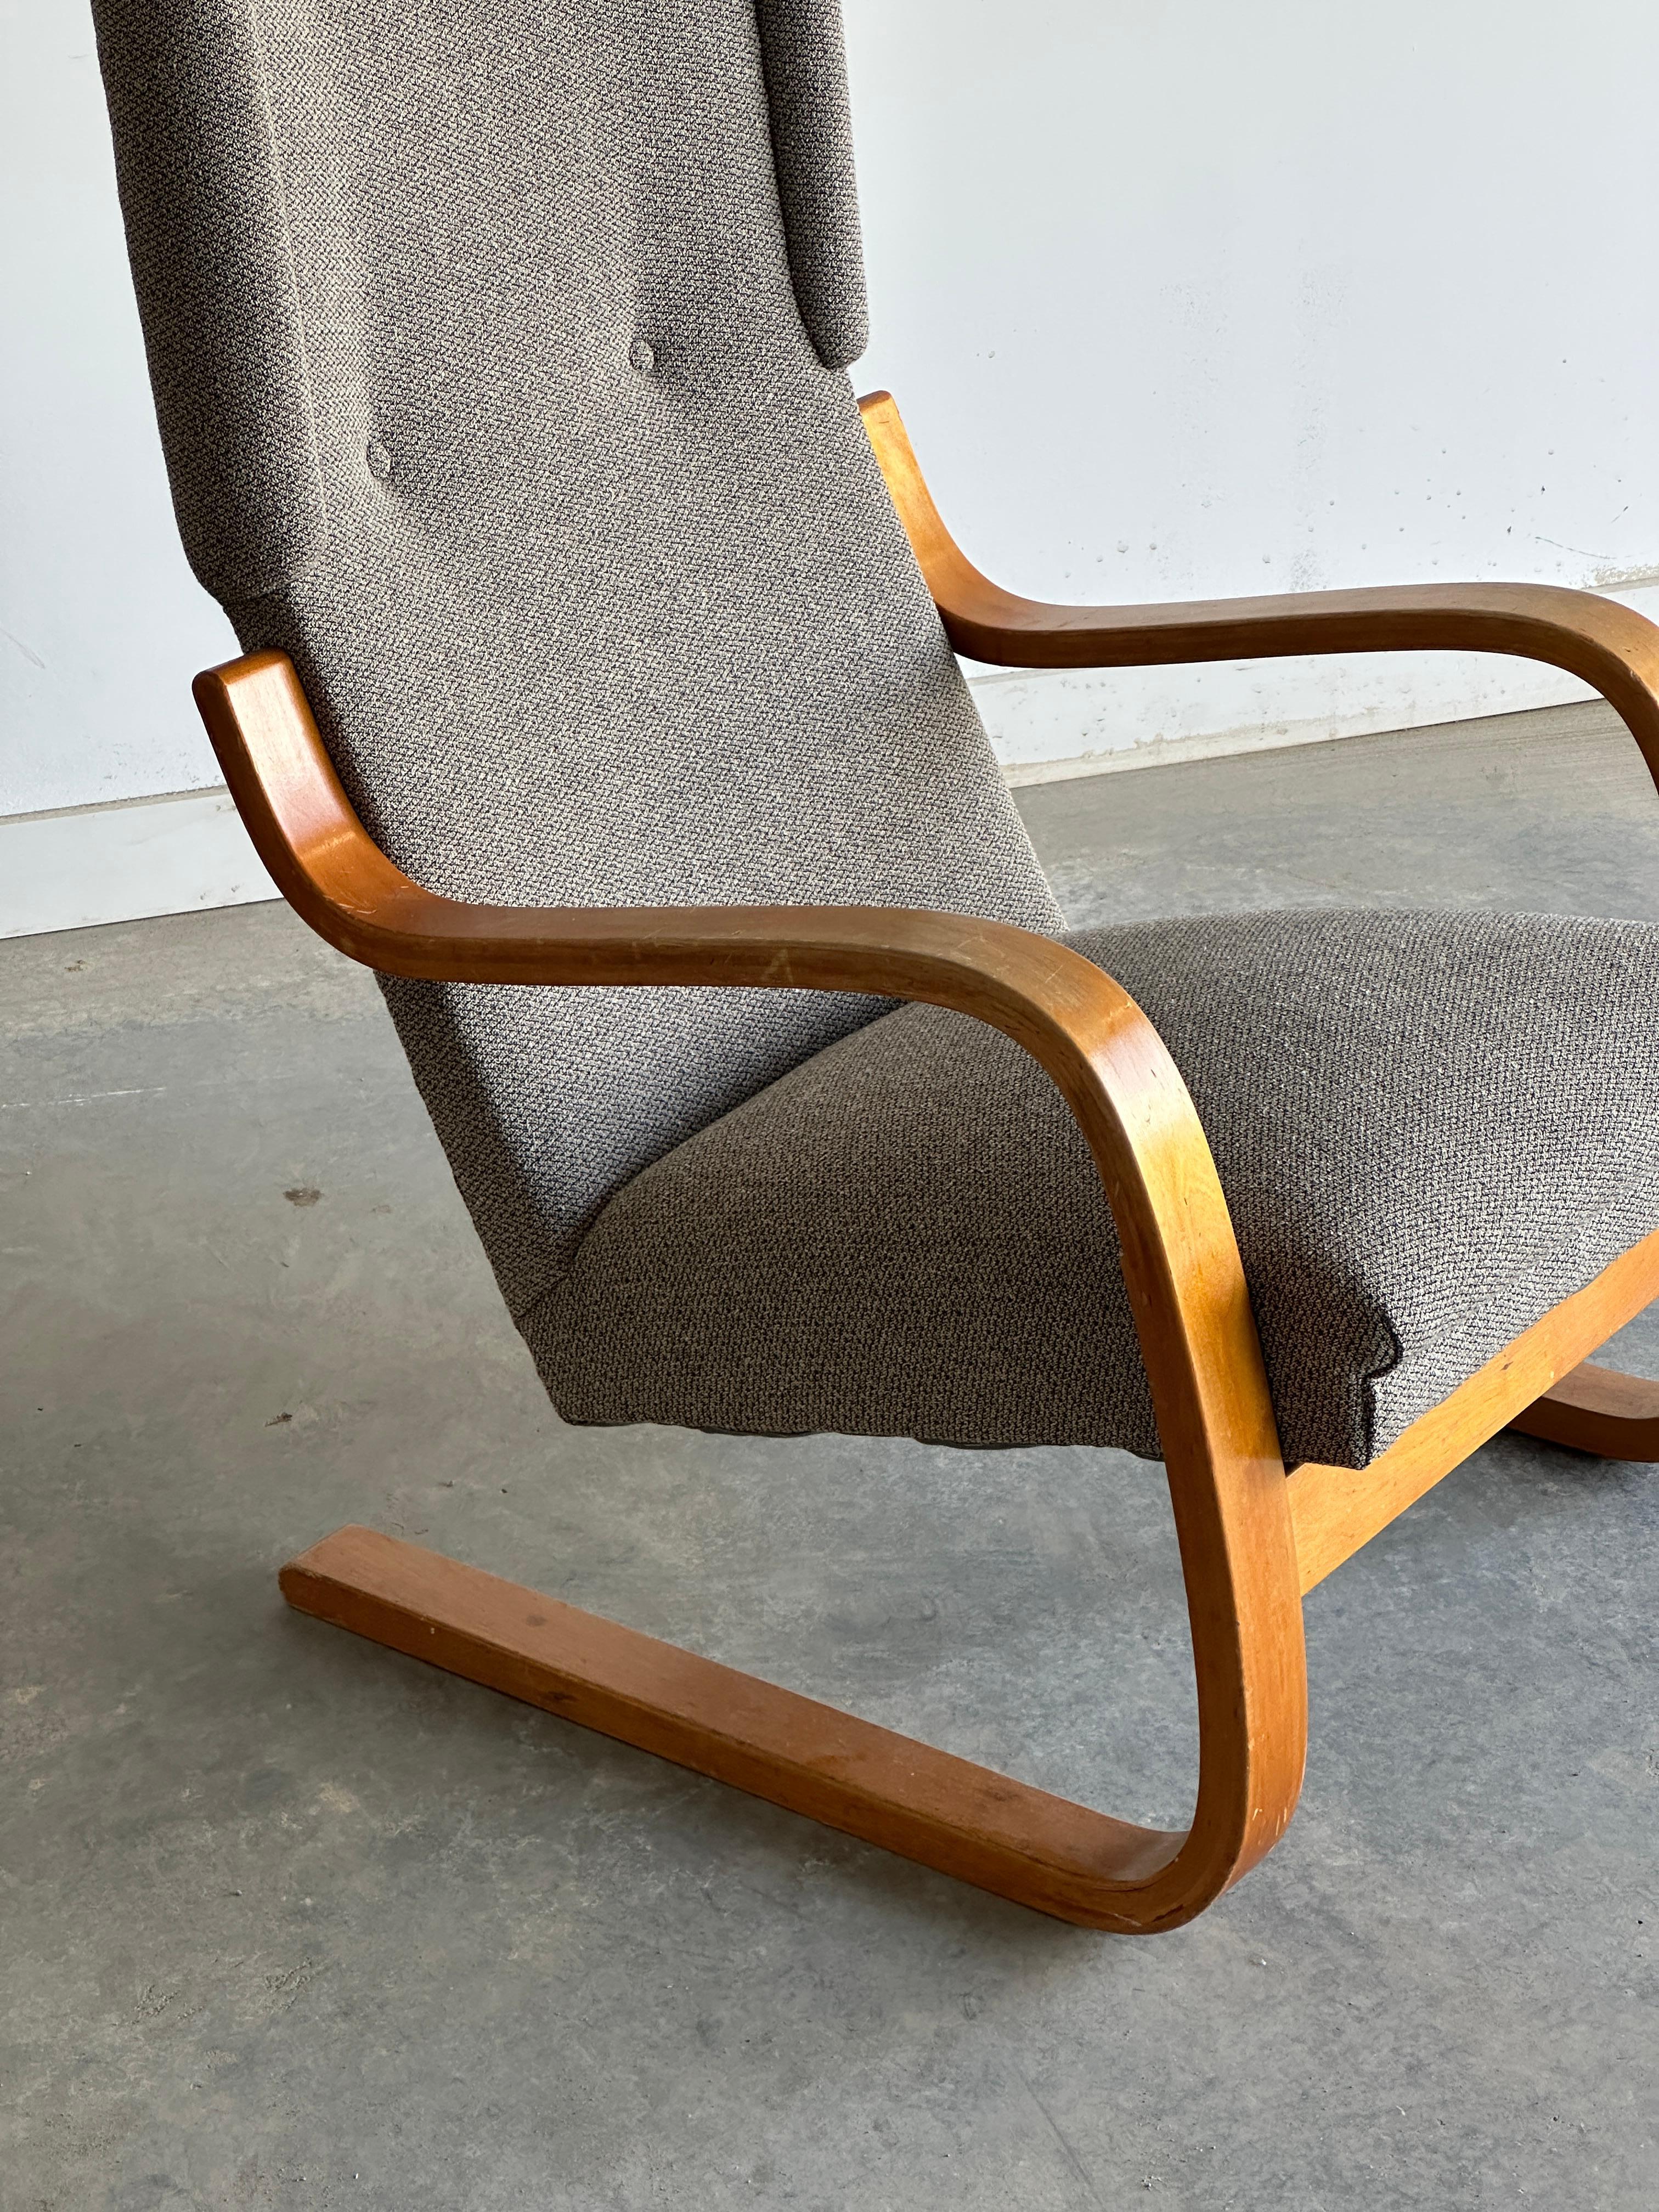 Wingback 36/401 cantilever lounge chair by Alvar Aalto for Artek In Fair Condition For Sale In Kleinburg, ON